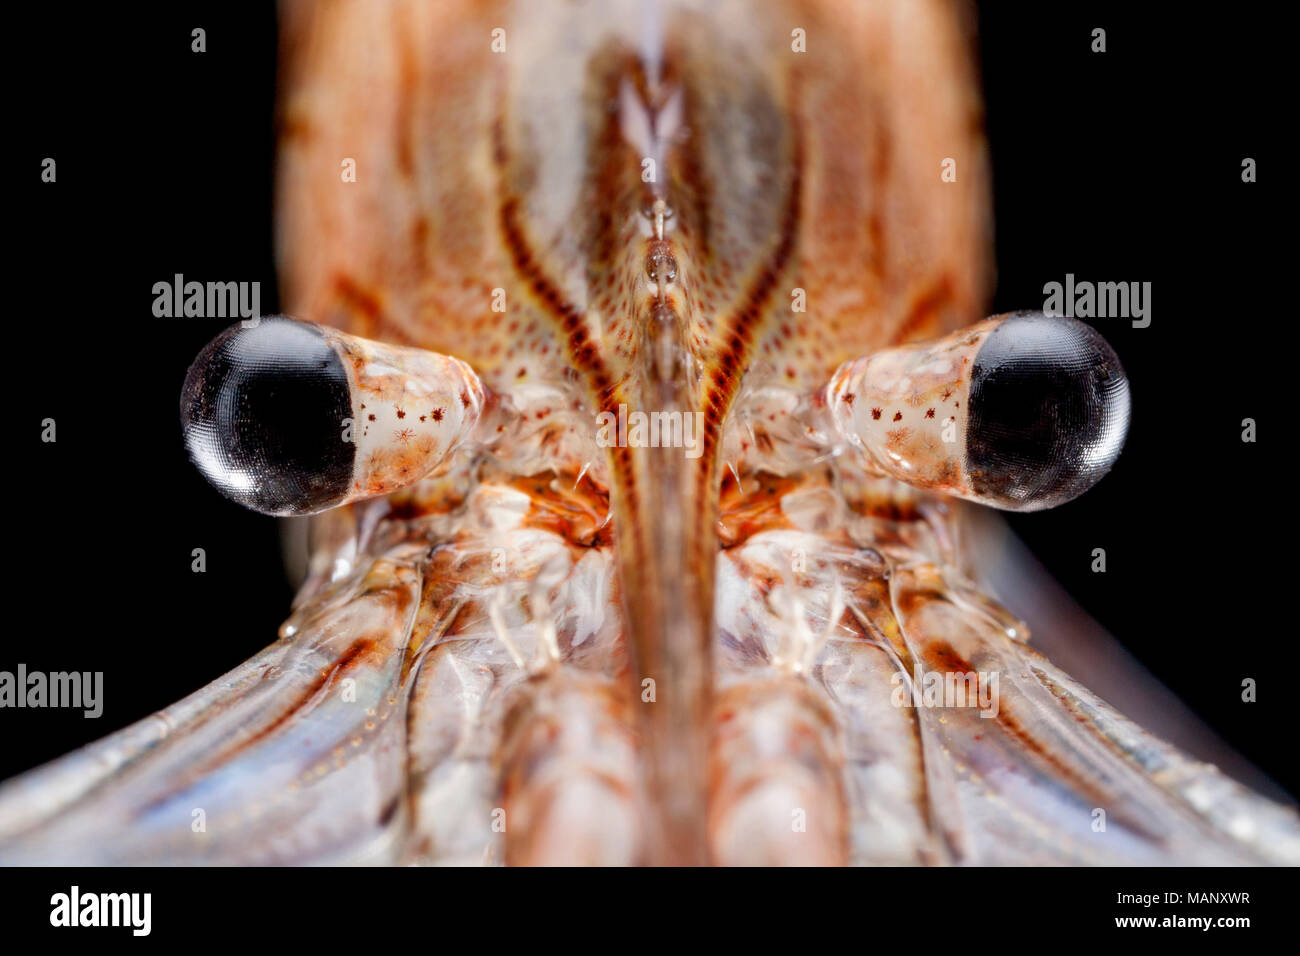 A close up of a common prawn and eyes, Palaemon serratus, caught in a prawn trap that had been lowered off a pier. Studio picture Dorset England UK GB Stock Photo